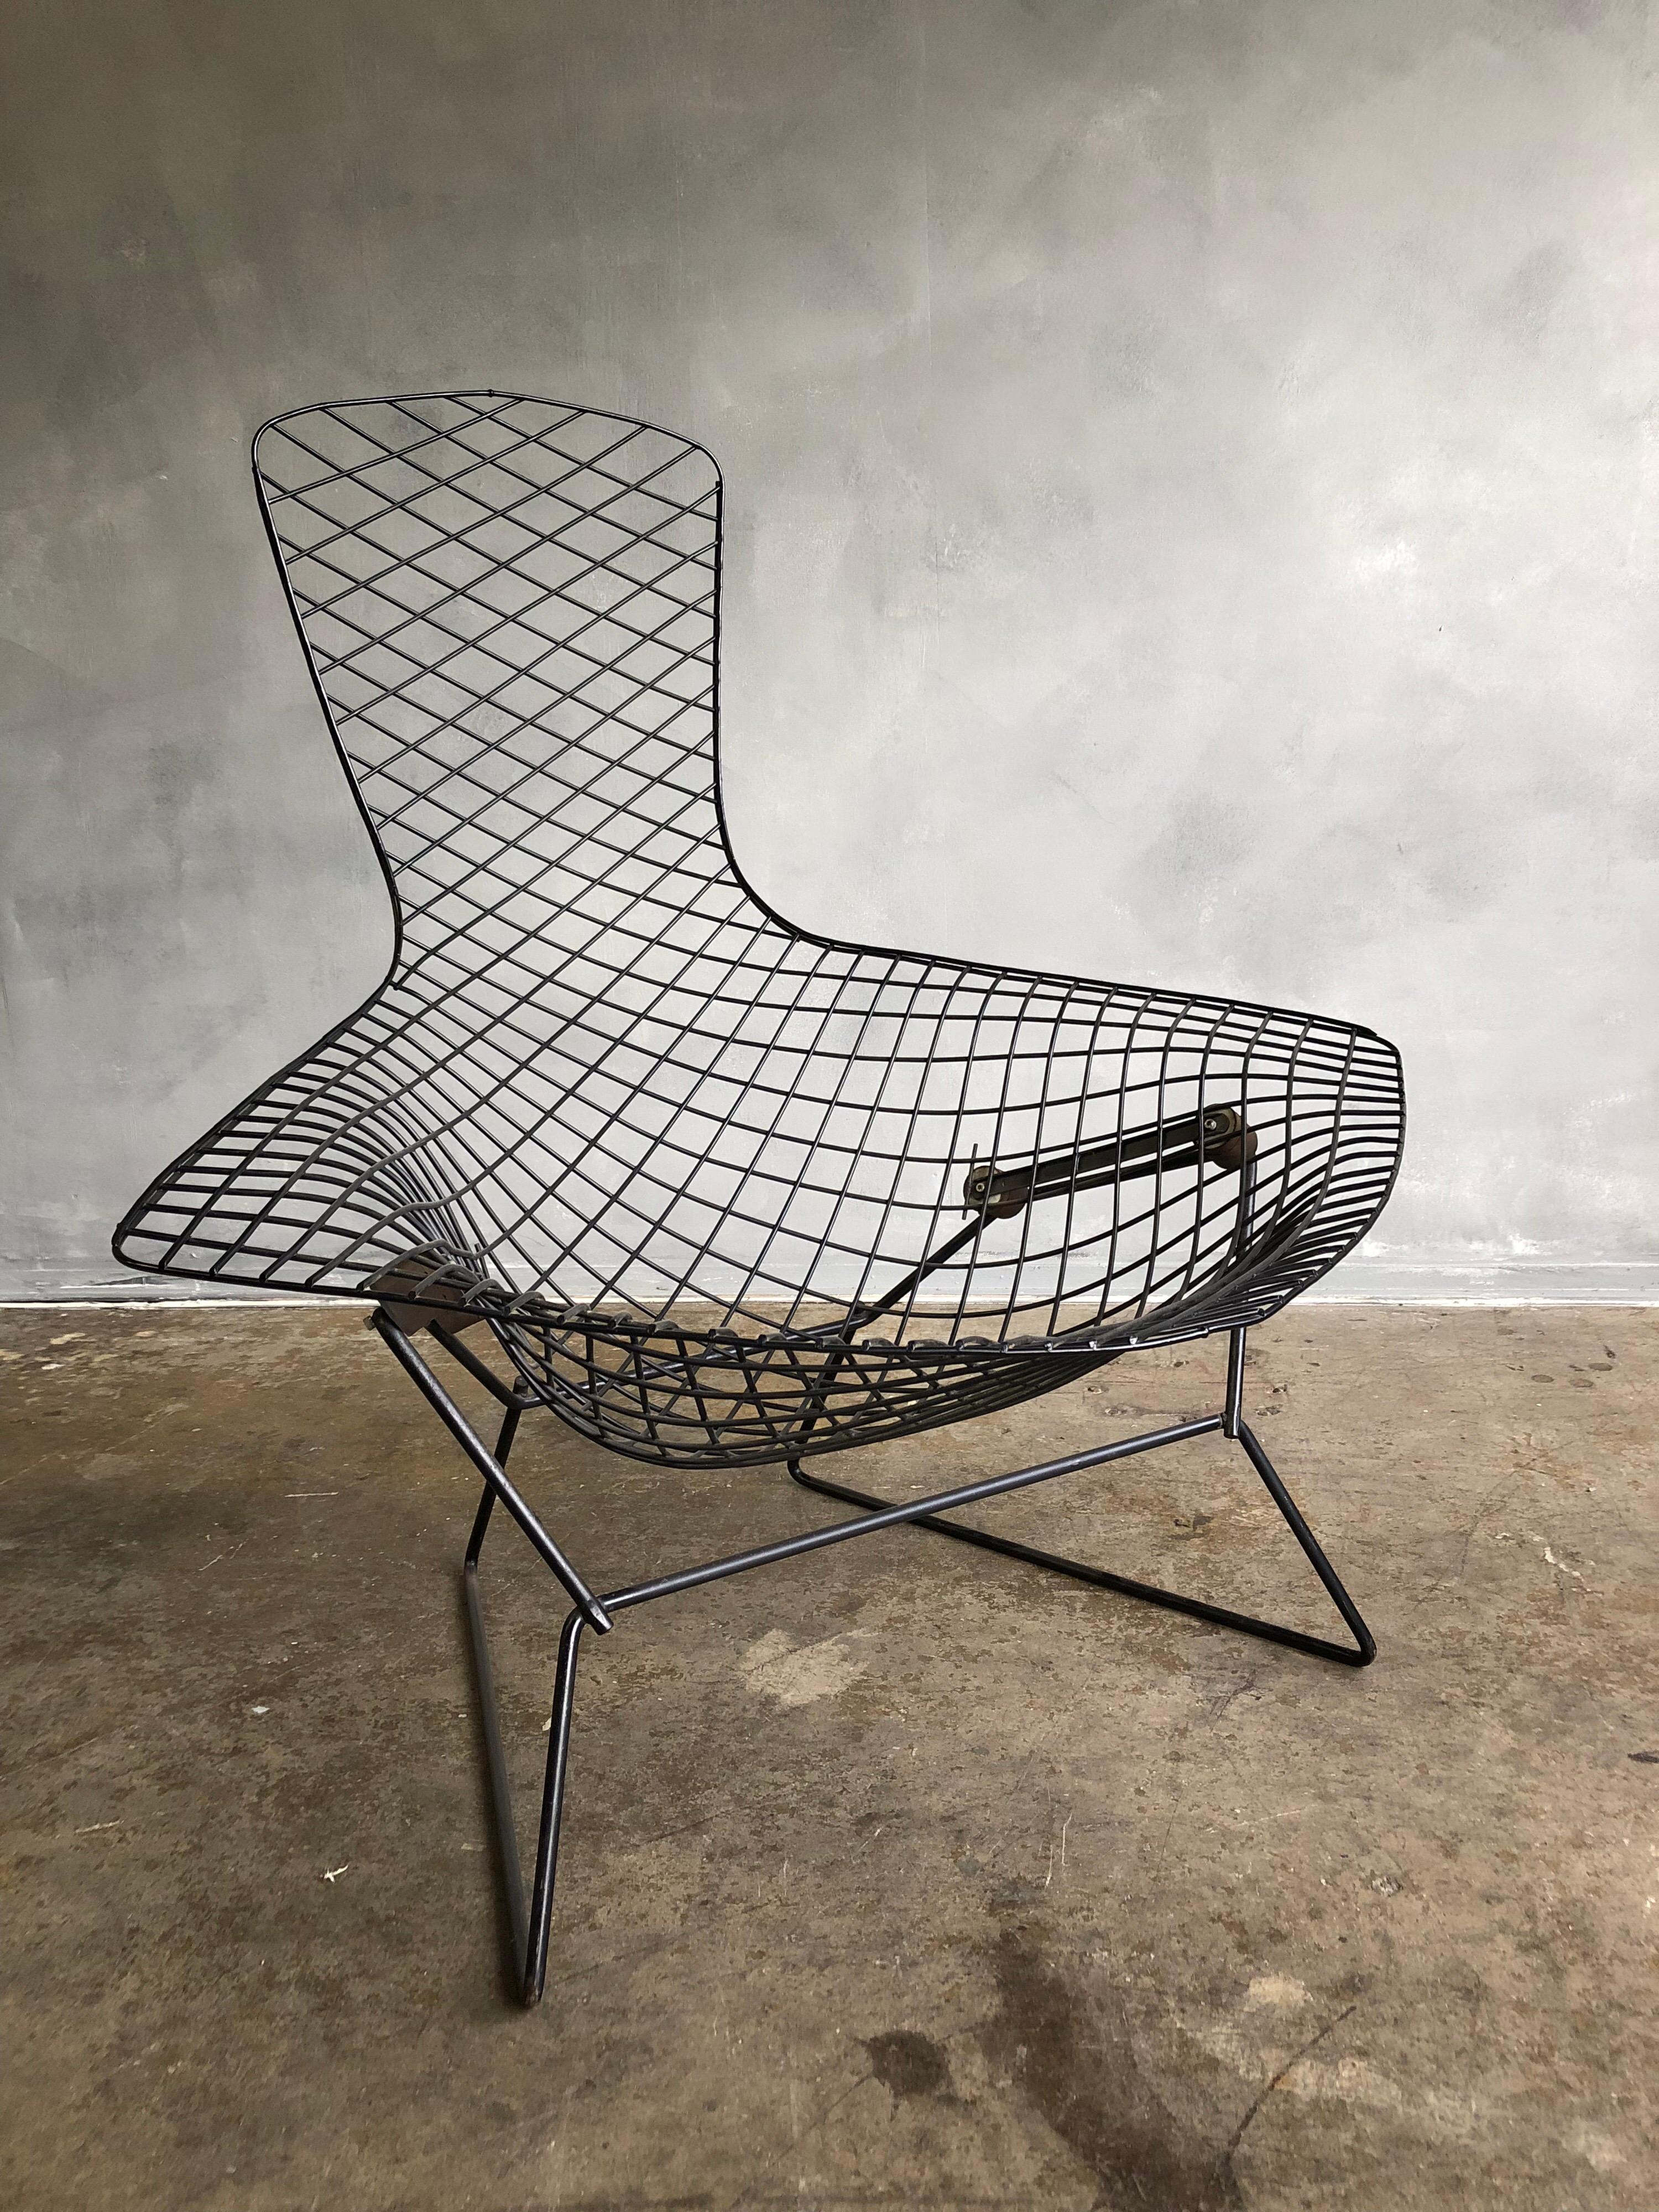 Midcentury Harry Bertoia bird chair. Wire framed lounge chair in excellent condition.